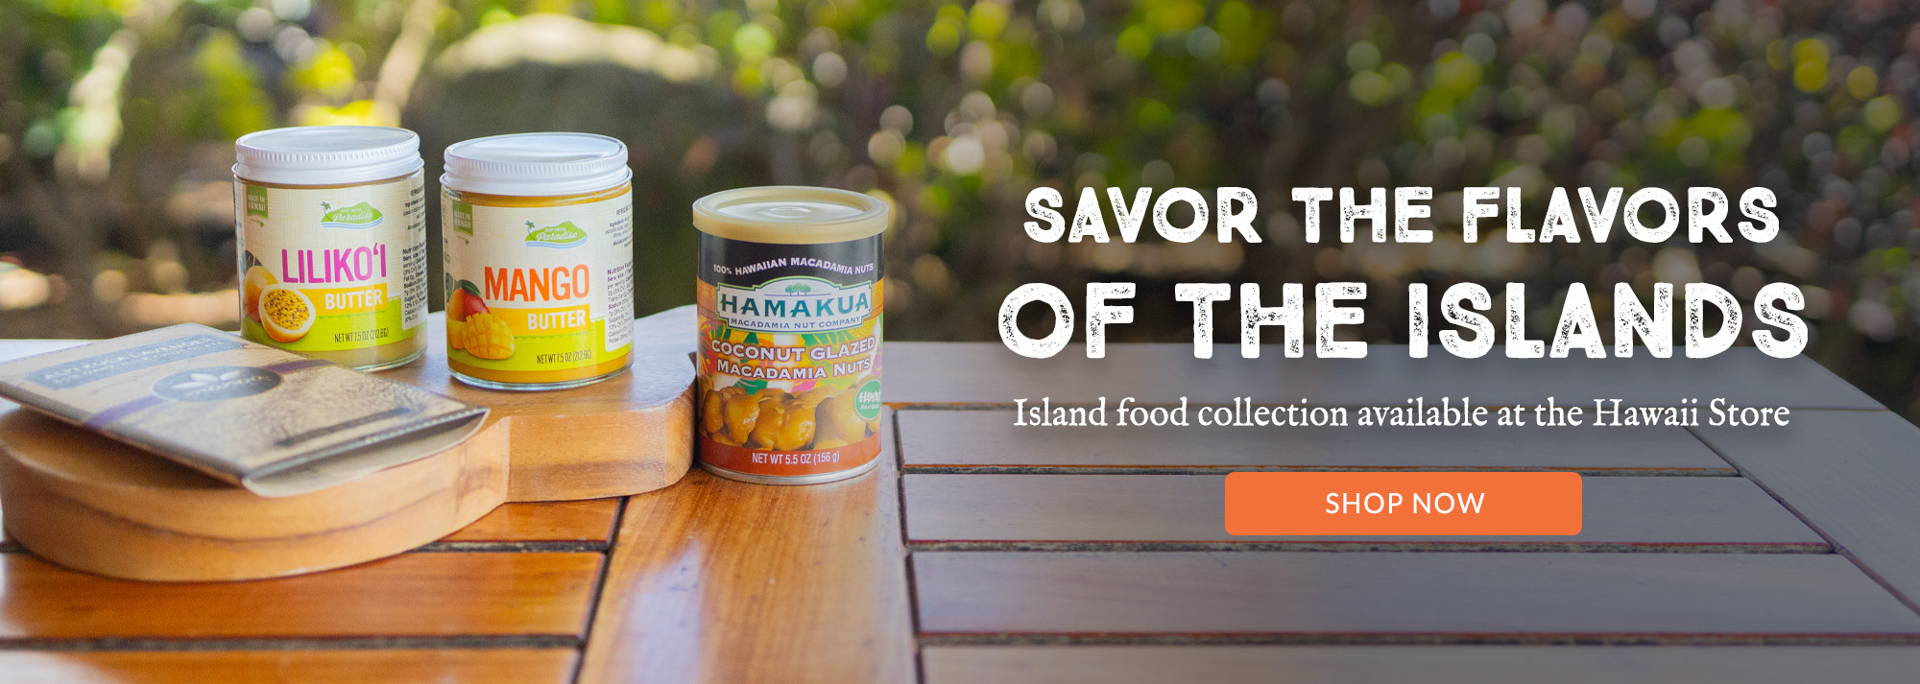 Savor the Flavors of the Islands! Treat Yourself and Your Loved Ones to Island Delights Available at The Hawaii Store.